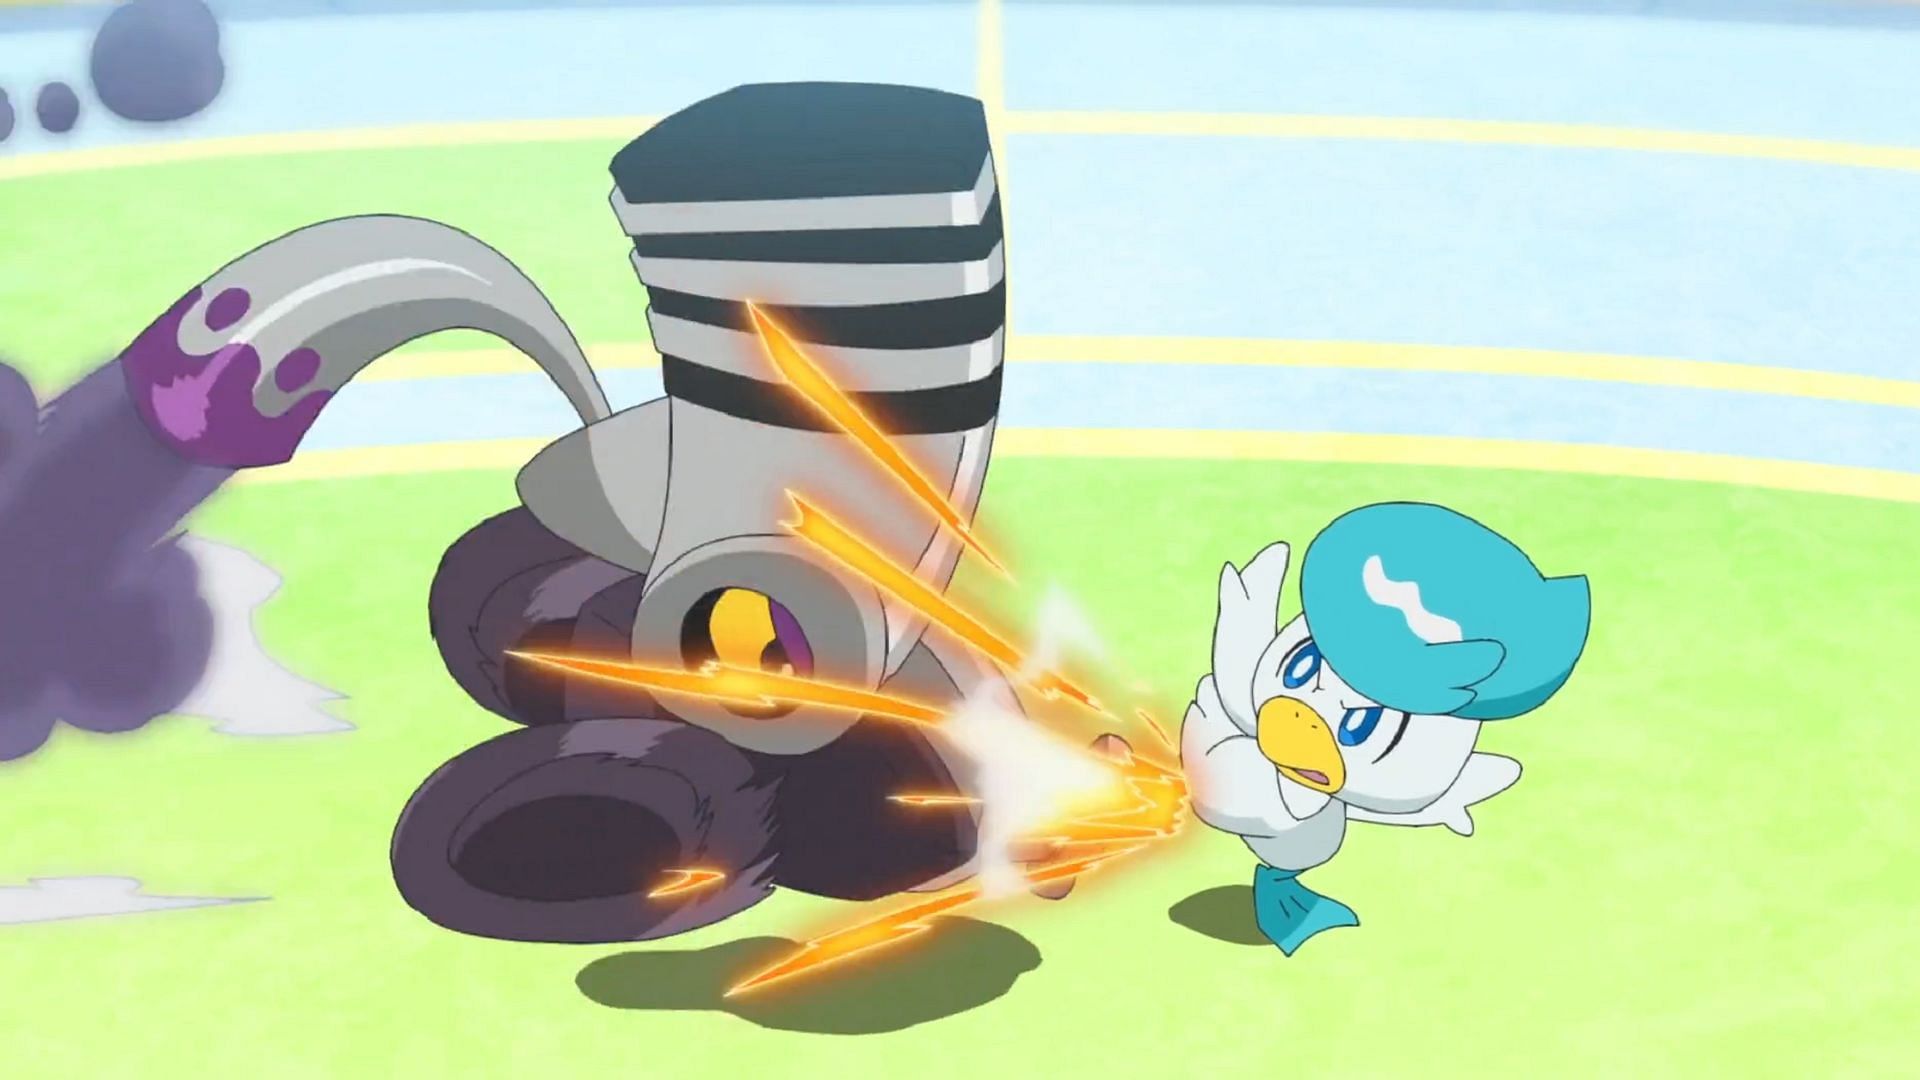 Quaxly gains the upper hand as Dot overcomes her stage fright in Pokemon Horizons Episode 49 (Image via The Pokemon Company)